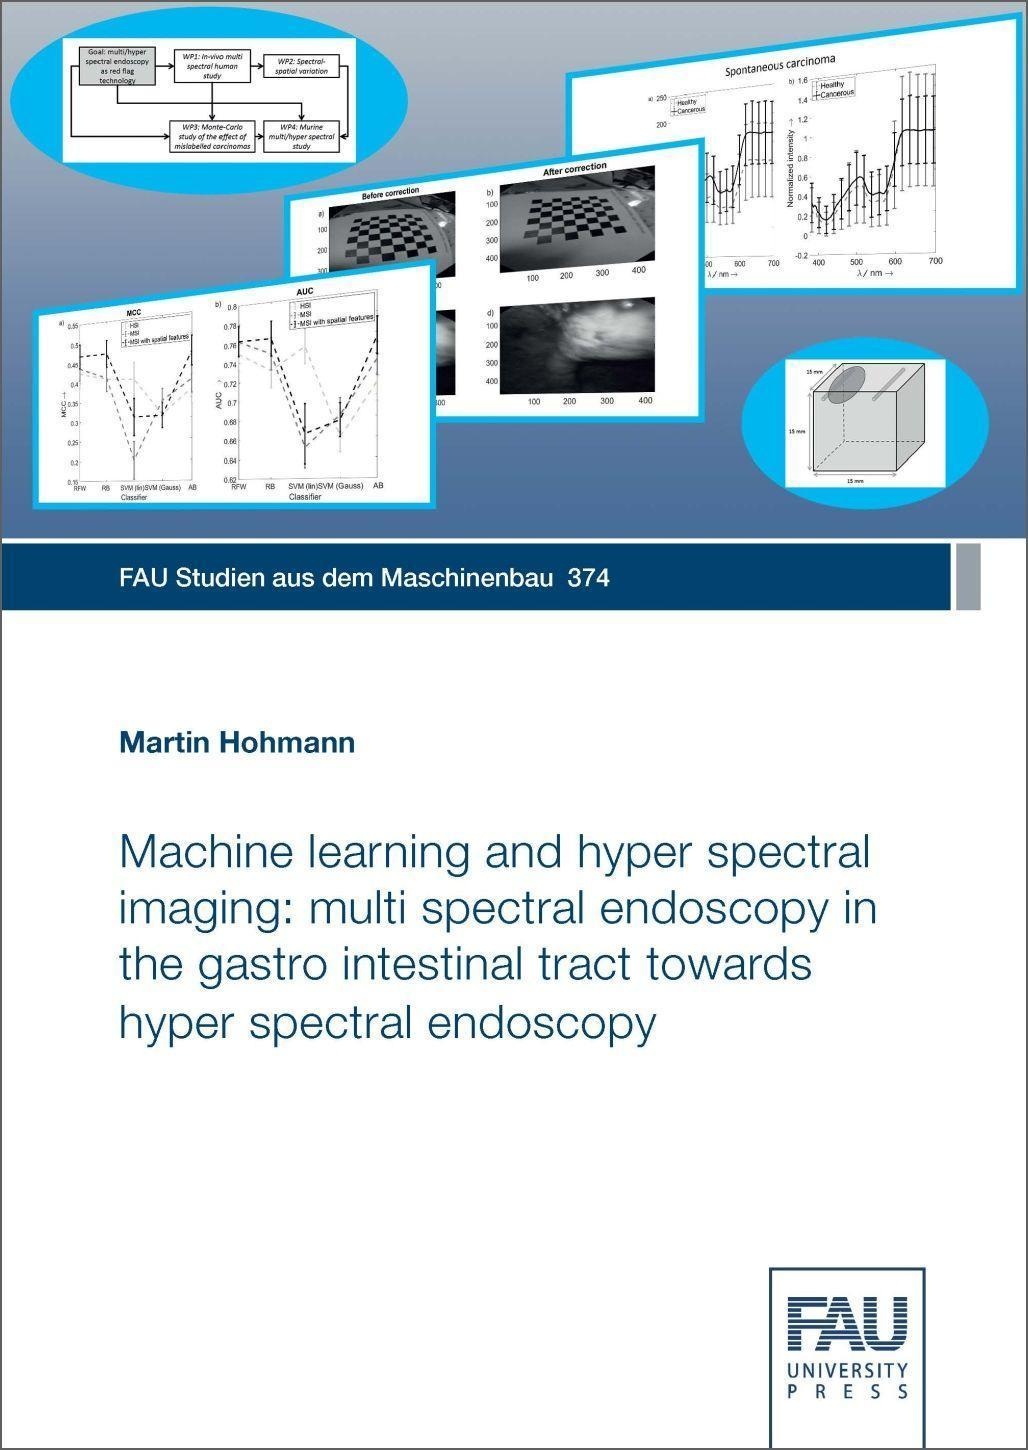 Machine Learning And Hyper Spectral Imaging: Multi Spectral Endoscopy In The Gastro Intestinal Tract Towards Hyper Spectral Endoscopy - Martin Hohmann